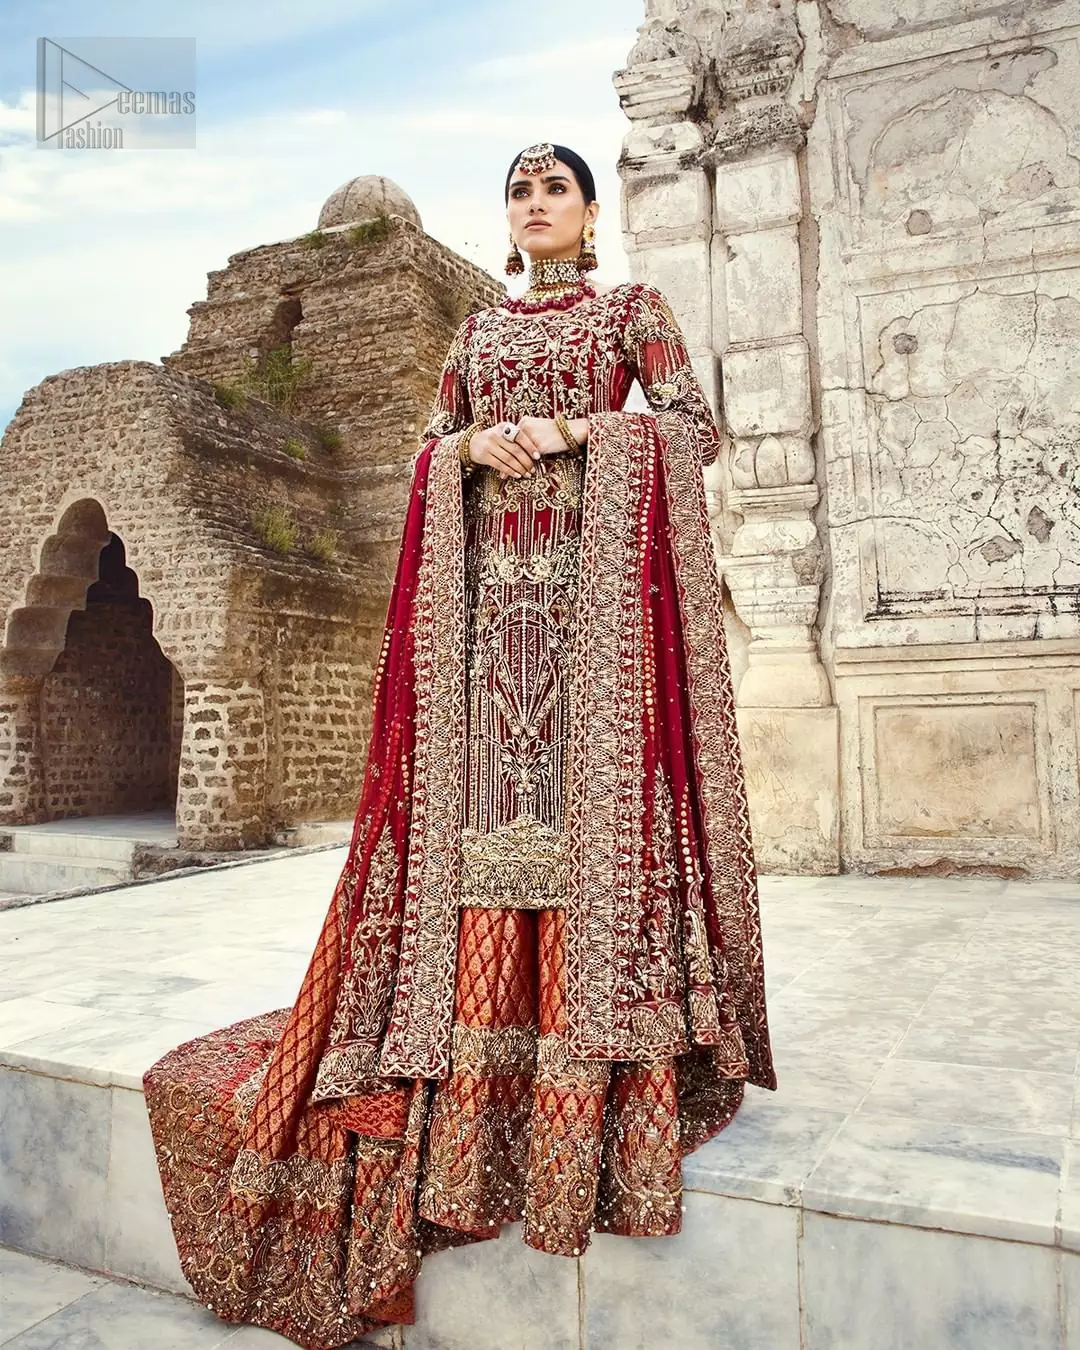 You are all set to make a lasting impact with the divine royalty of this dress. This beautiful dress comes with a maroon back train lehenga with beautiful embellishment around the hem. The shirt is adoned with golden zardozi work around the neckline and vertically worked gold lines and it finished with a thick embellished border. The sleeves are embellished with motifs all over along with a thick embroidered border. The dupatta incorporates beautifully designed borders on all four sides, focusing on the heavily embellished pallu borders to give it a perfect maharani look.